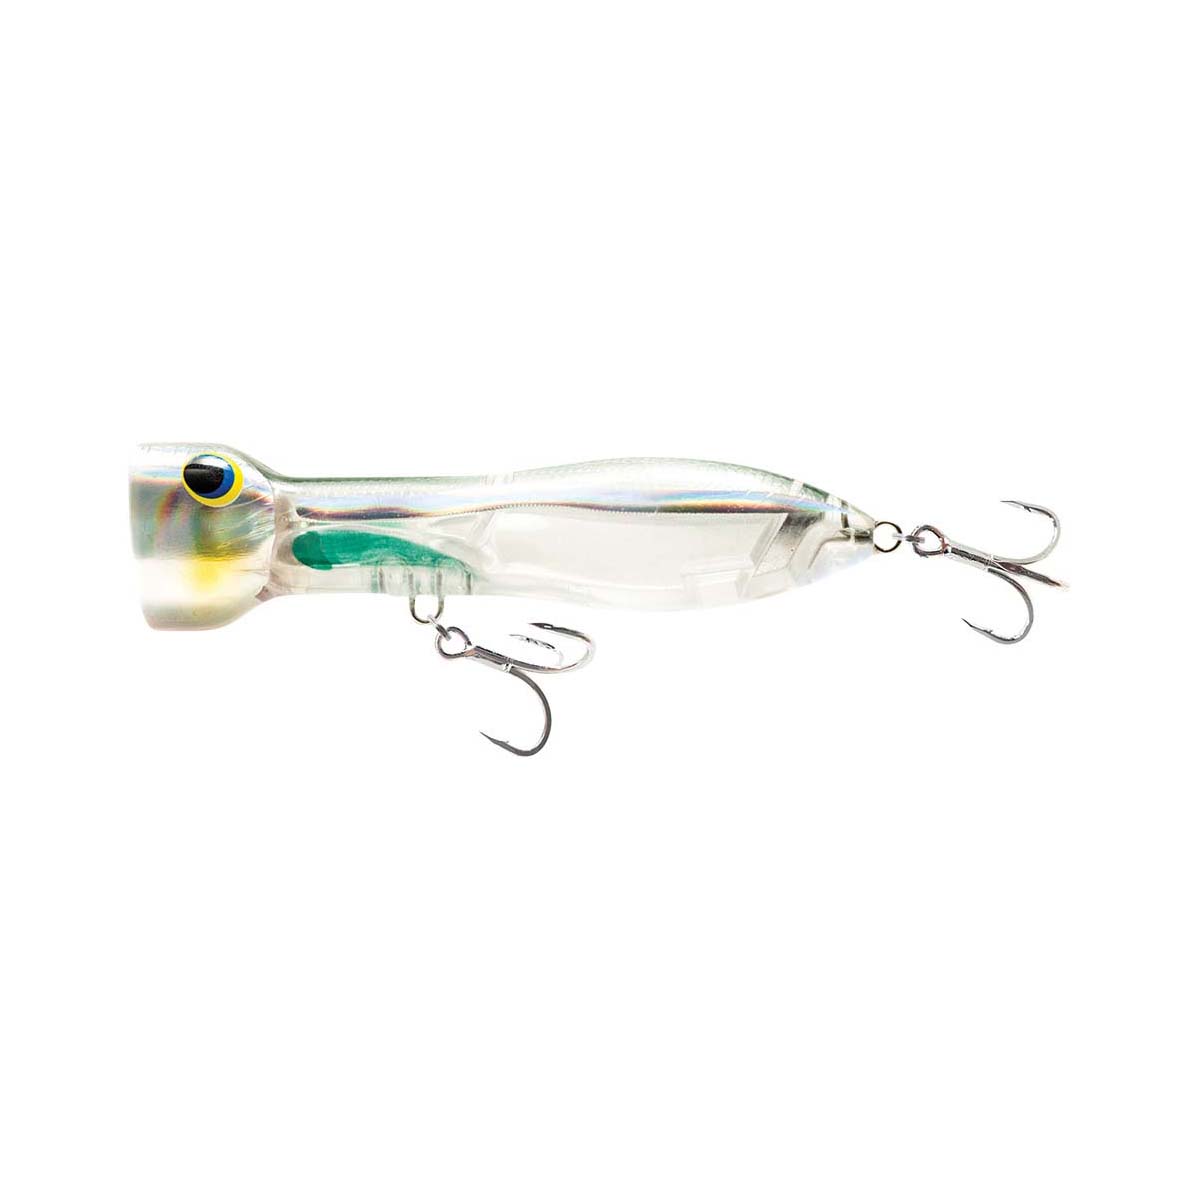 Nomad Chug Norris Saurface Lure 7.2cm Holo Ghost Shad